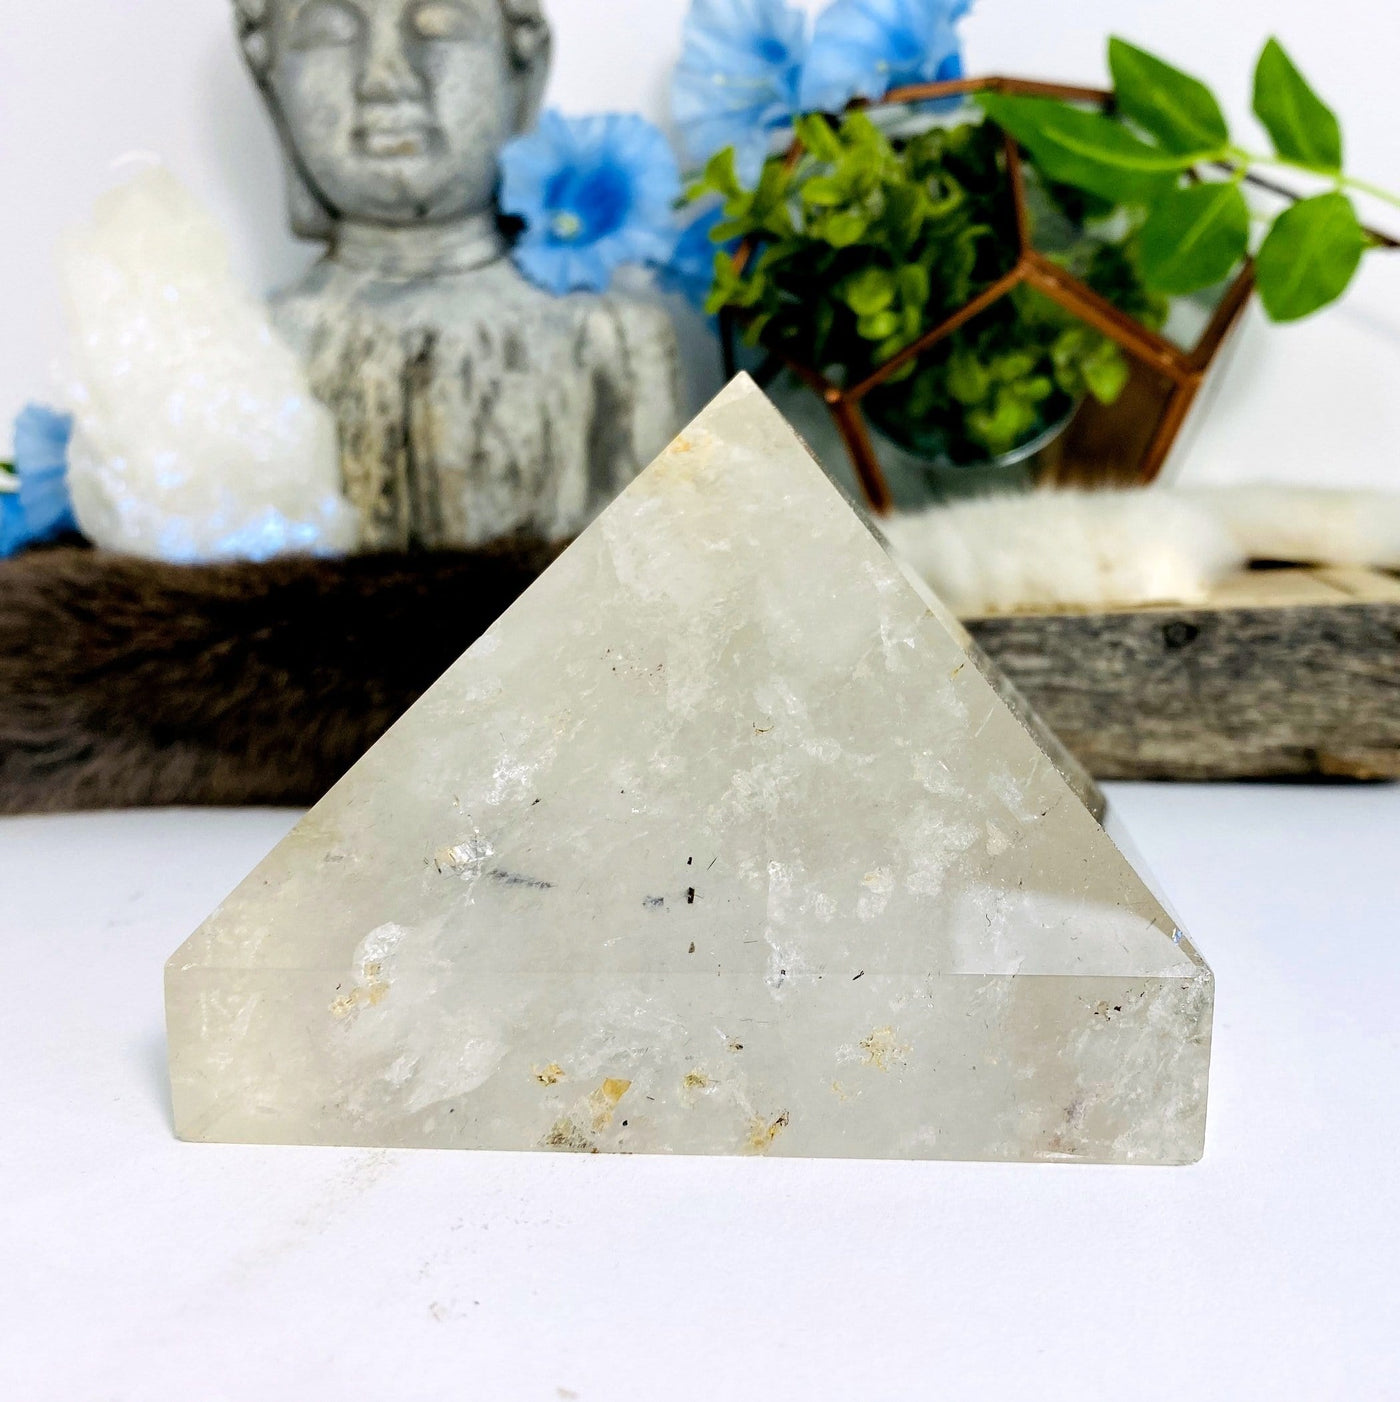 Crystal Quartz Pyramid with decorations in the background